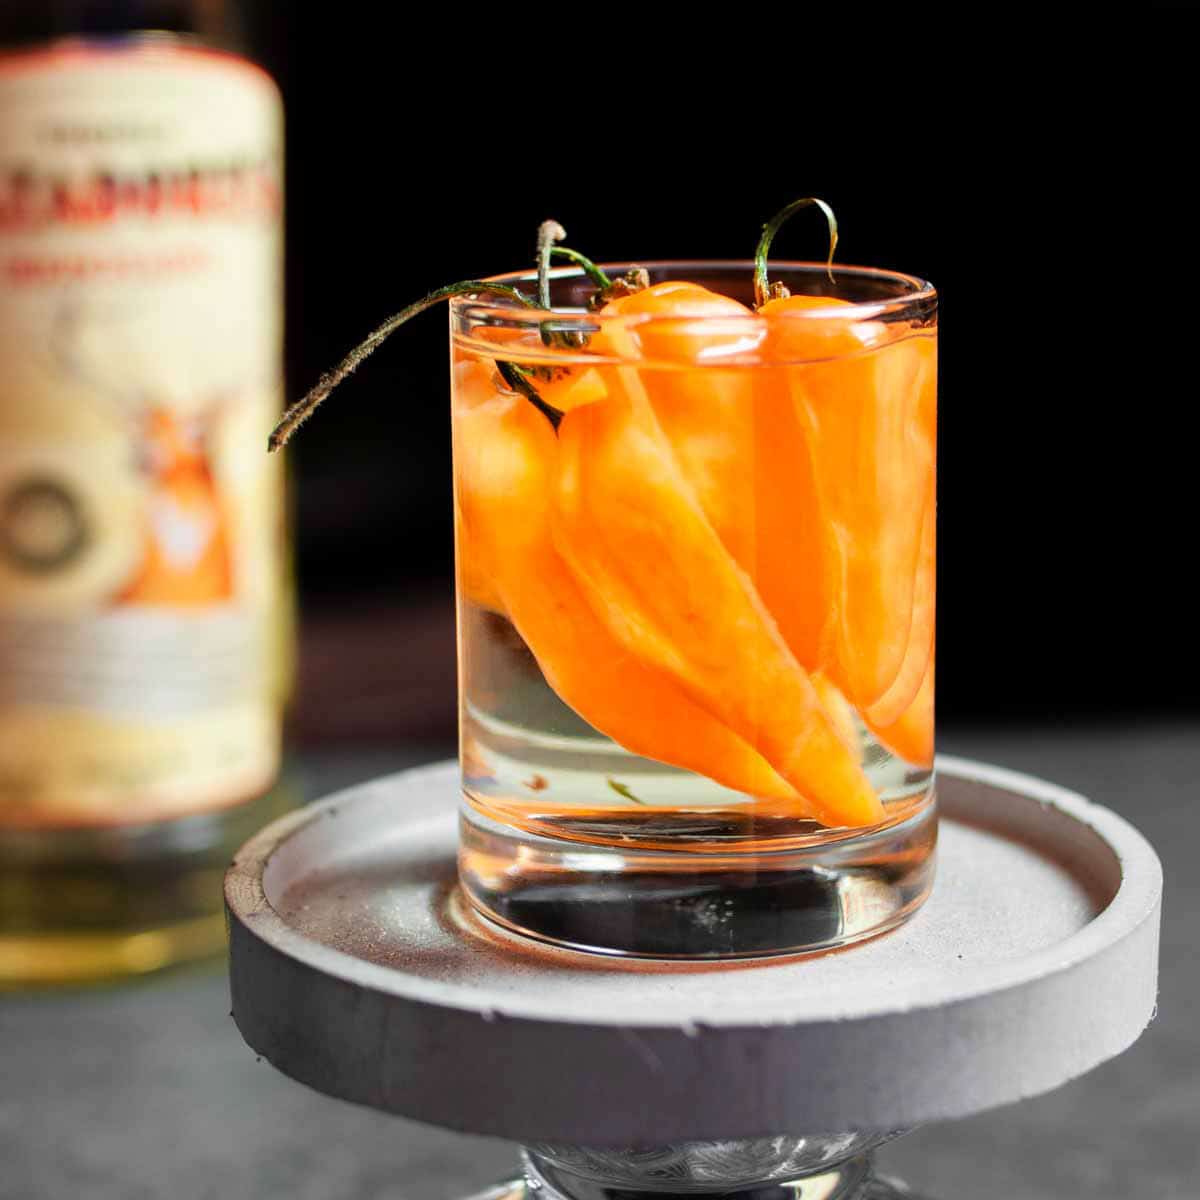 Habanero peppers in a glass of tequila.